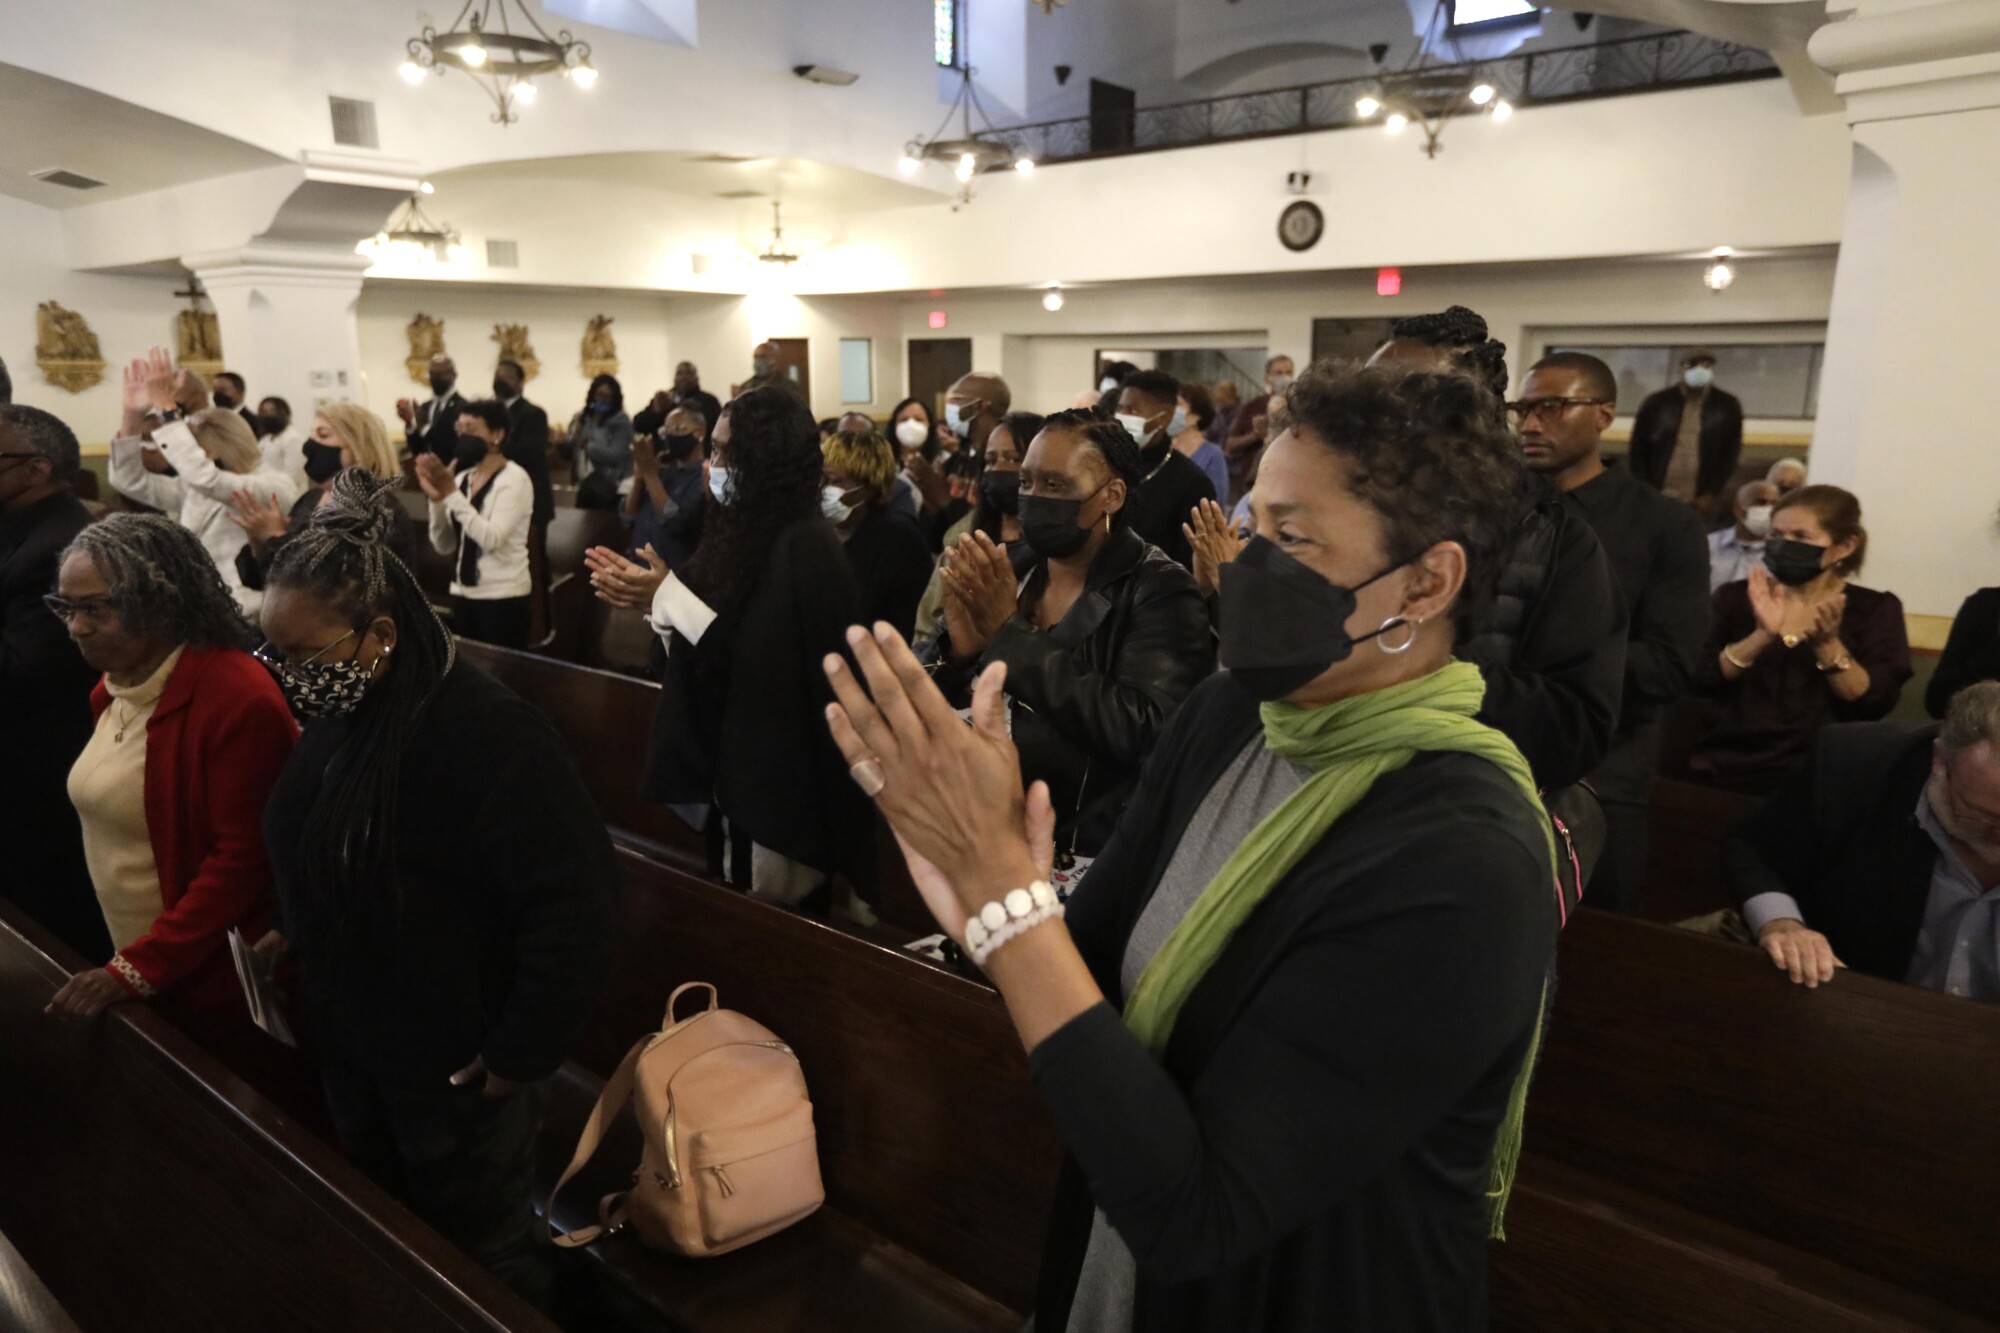 Friends and family give a standing ovation in a church.